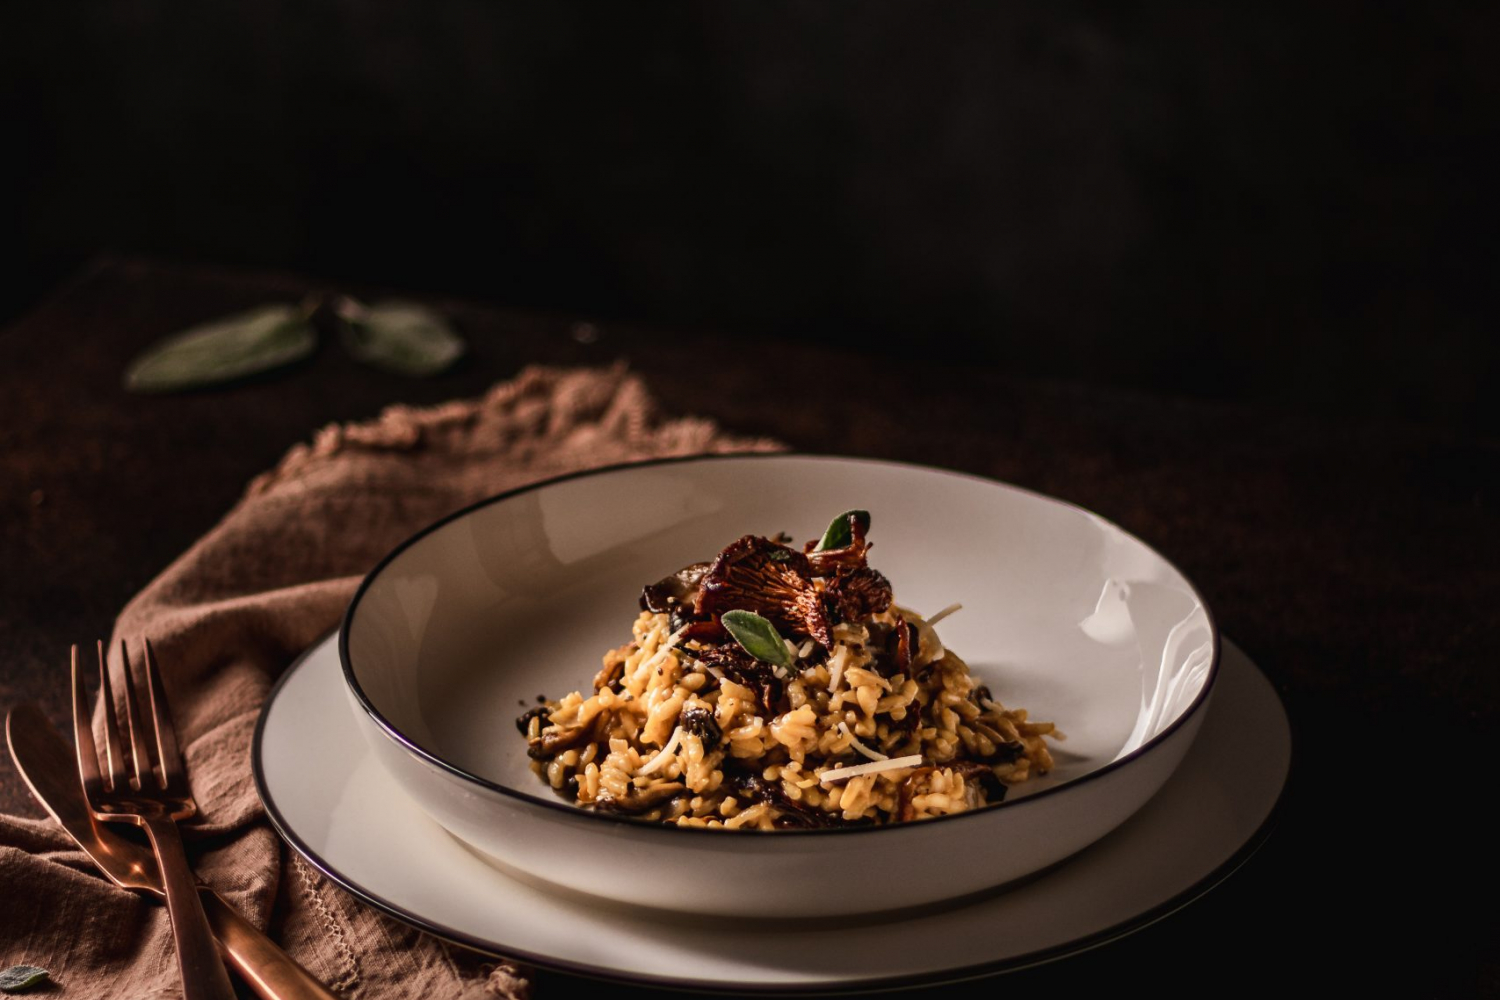 Plate of risotto garnished with cooked wild mushrooms and fresh sage.